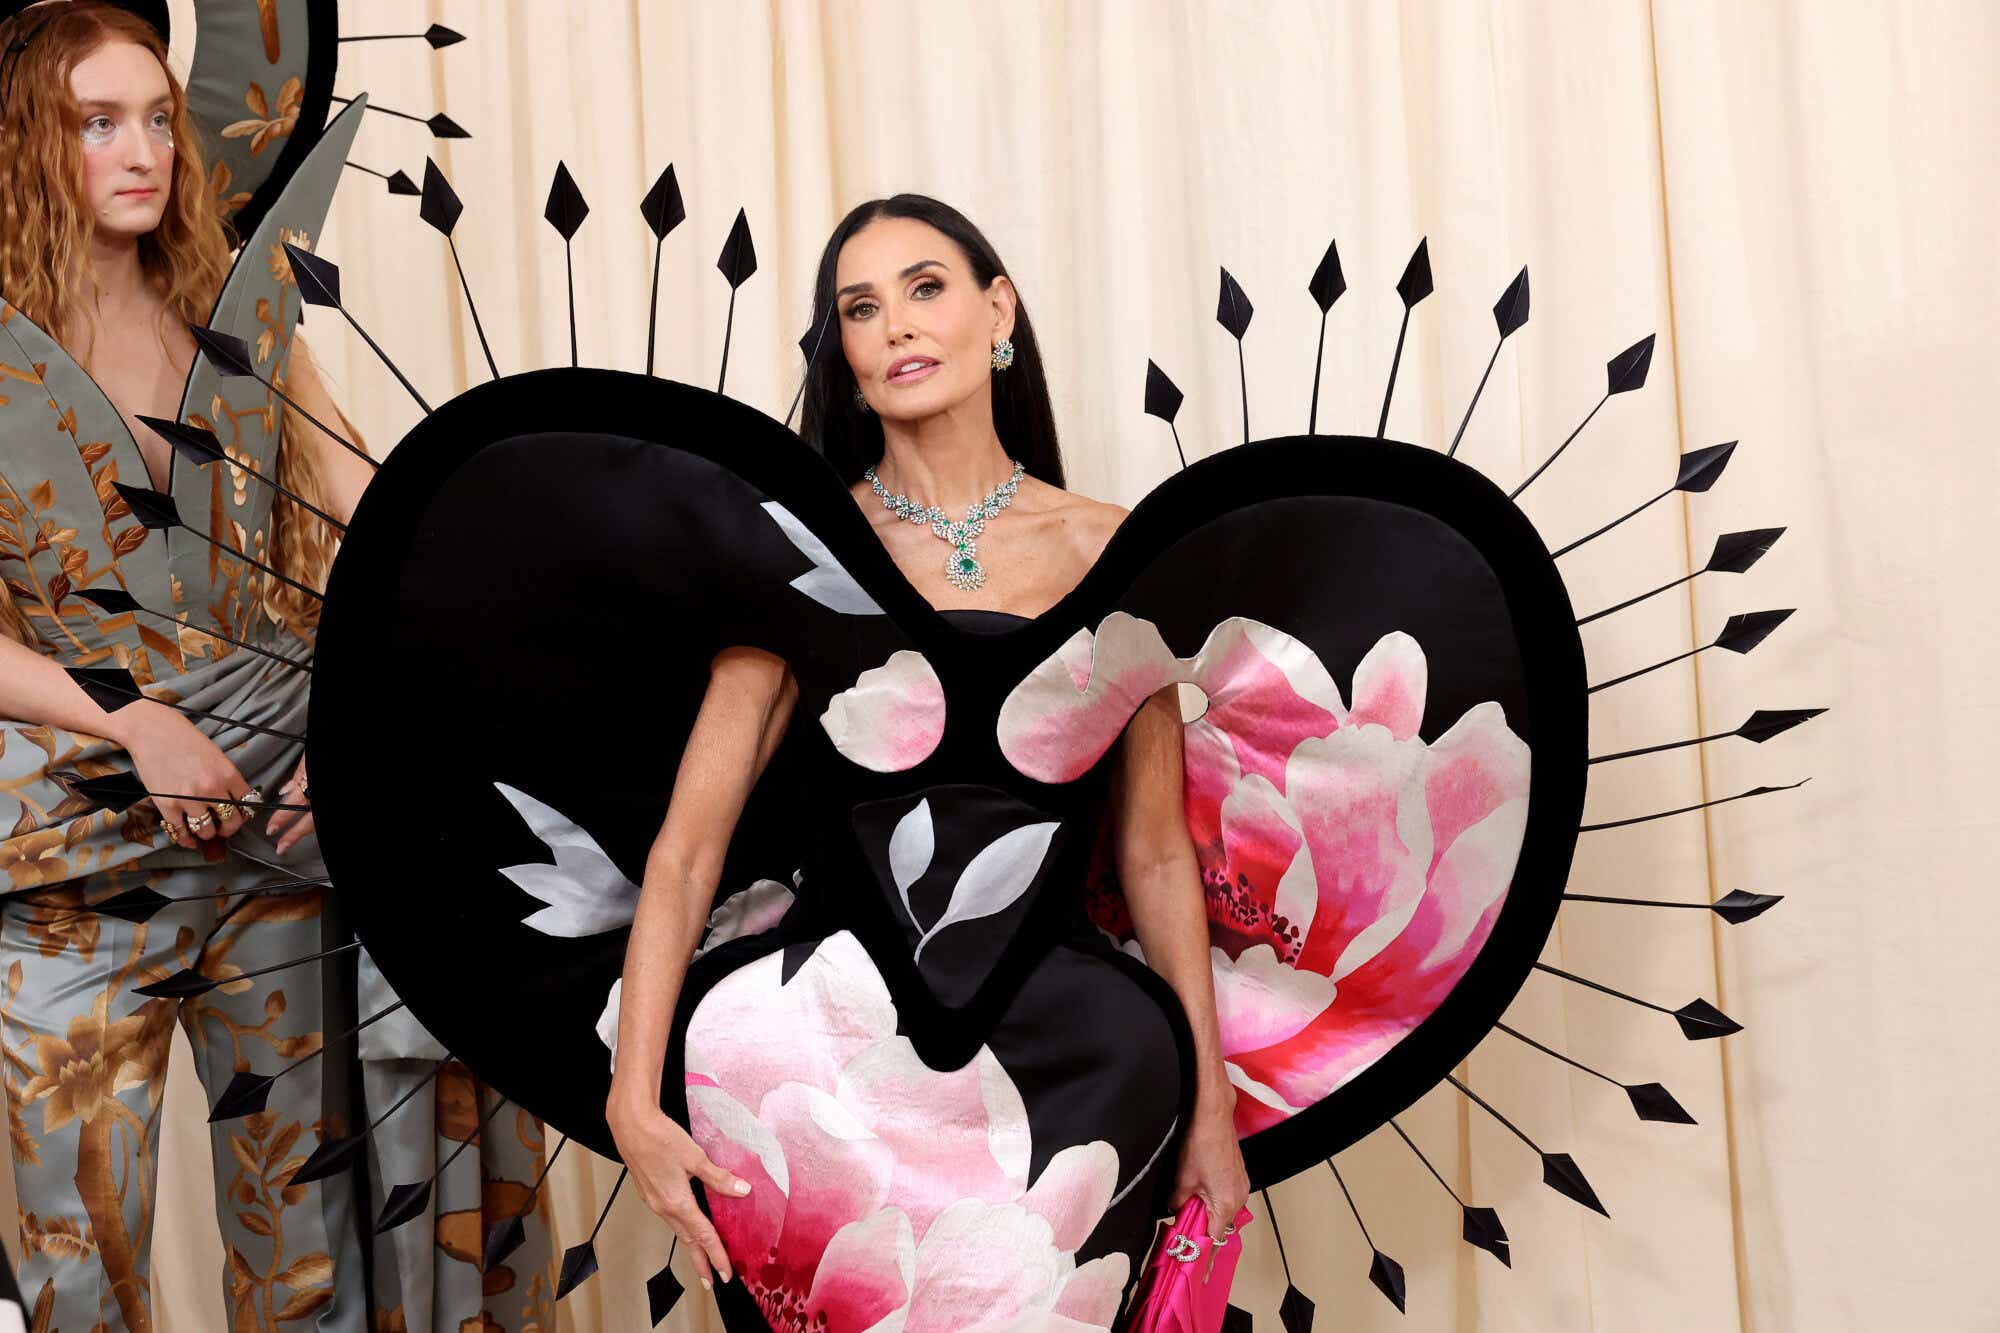 Demi wears a black dress with a pale pink rose design and an exaggerated structured hip, with a stiff heart-shaped cape trimmed with black arrows. 